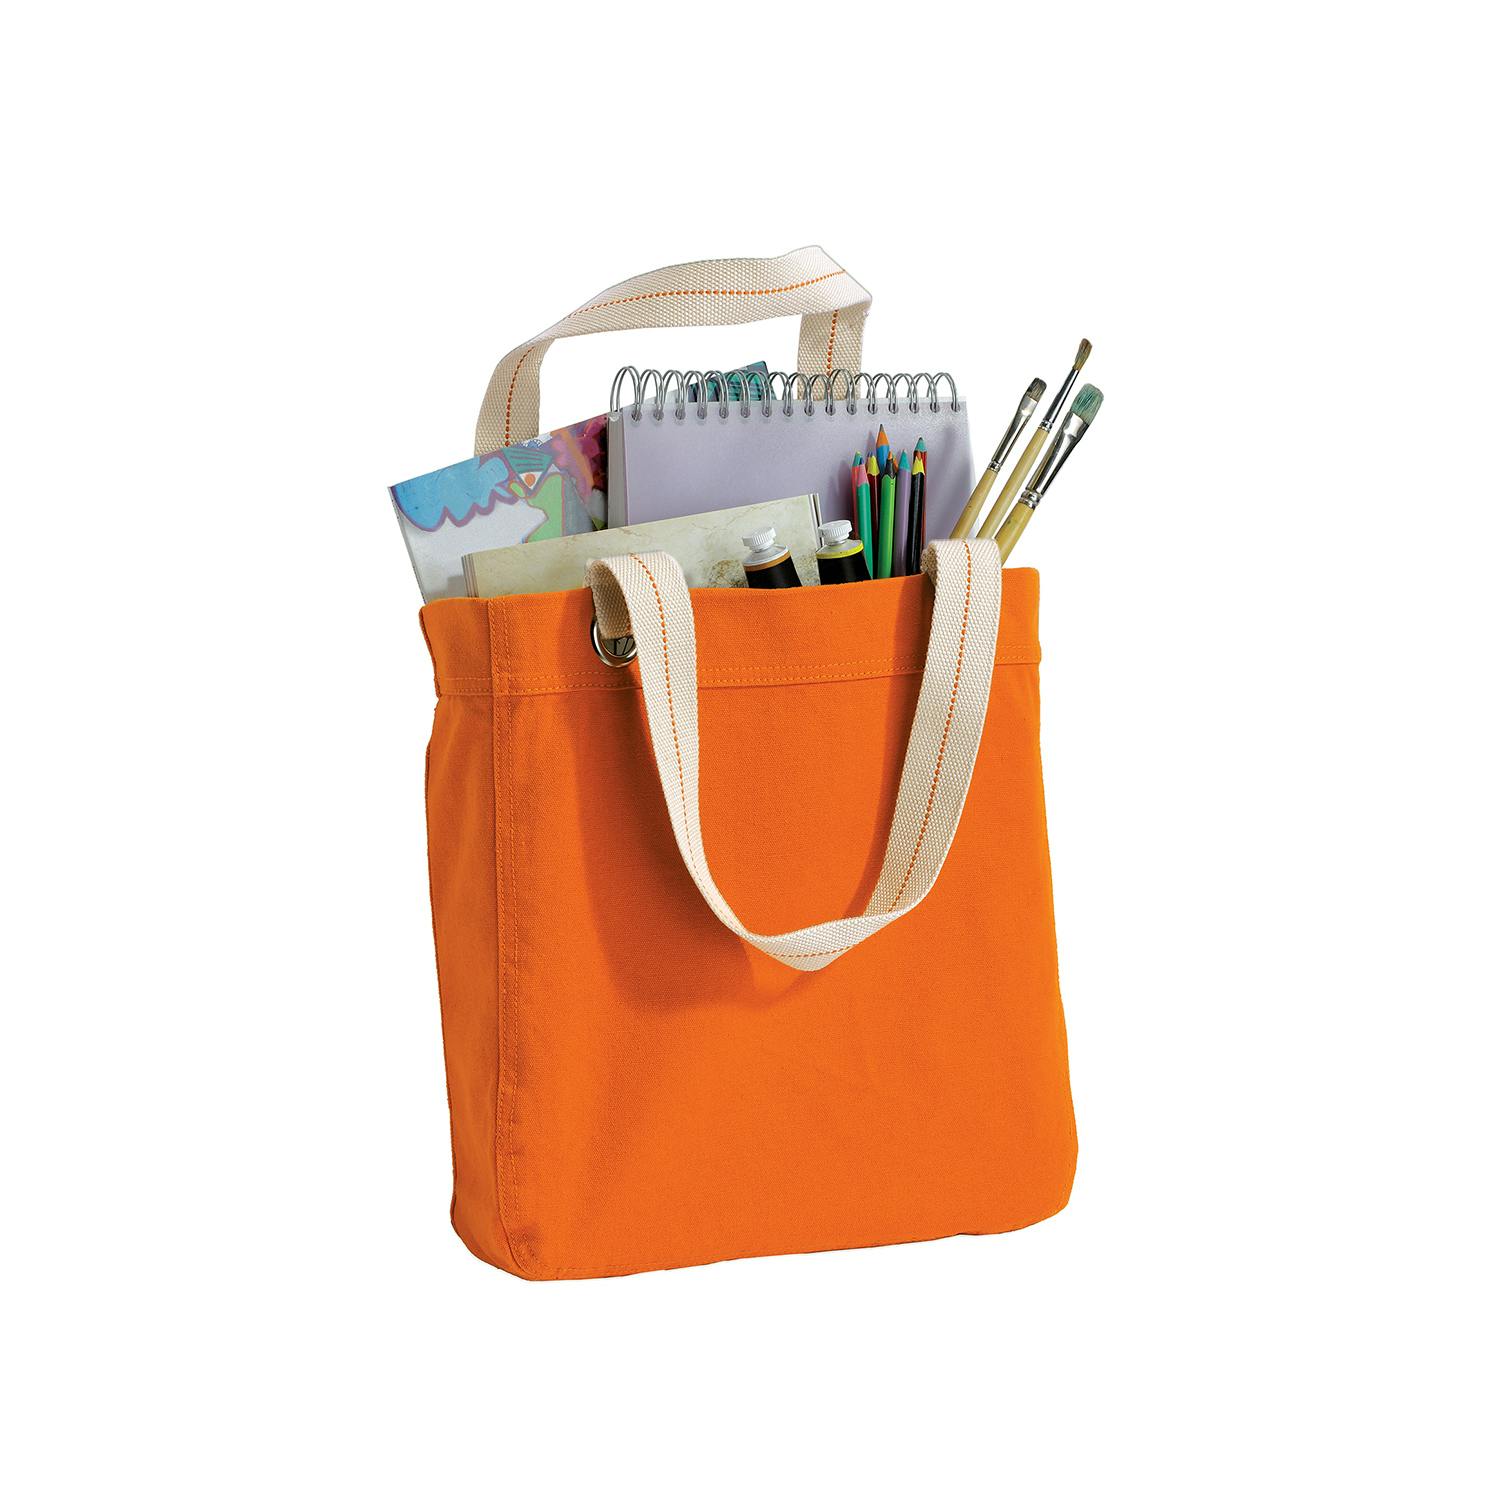 Port Authority Allie Canvas Tote Bag - additional Image 1